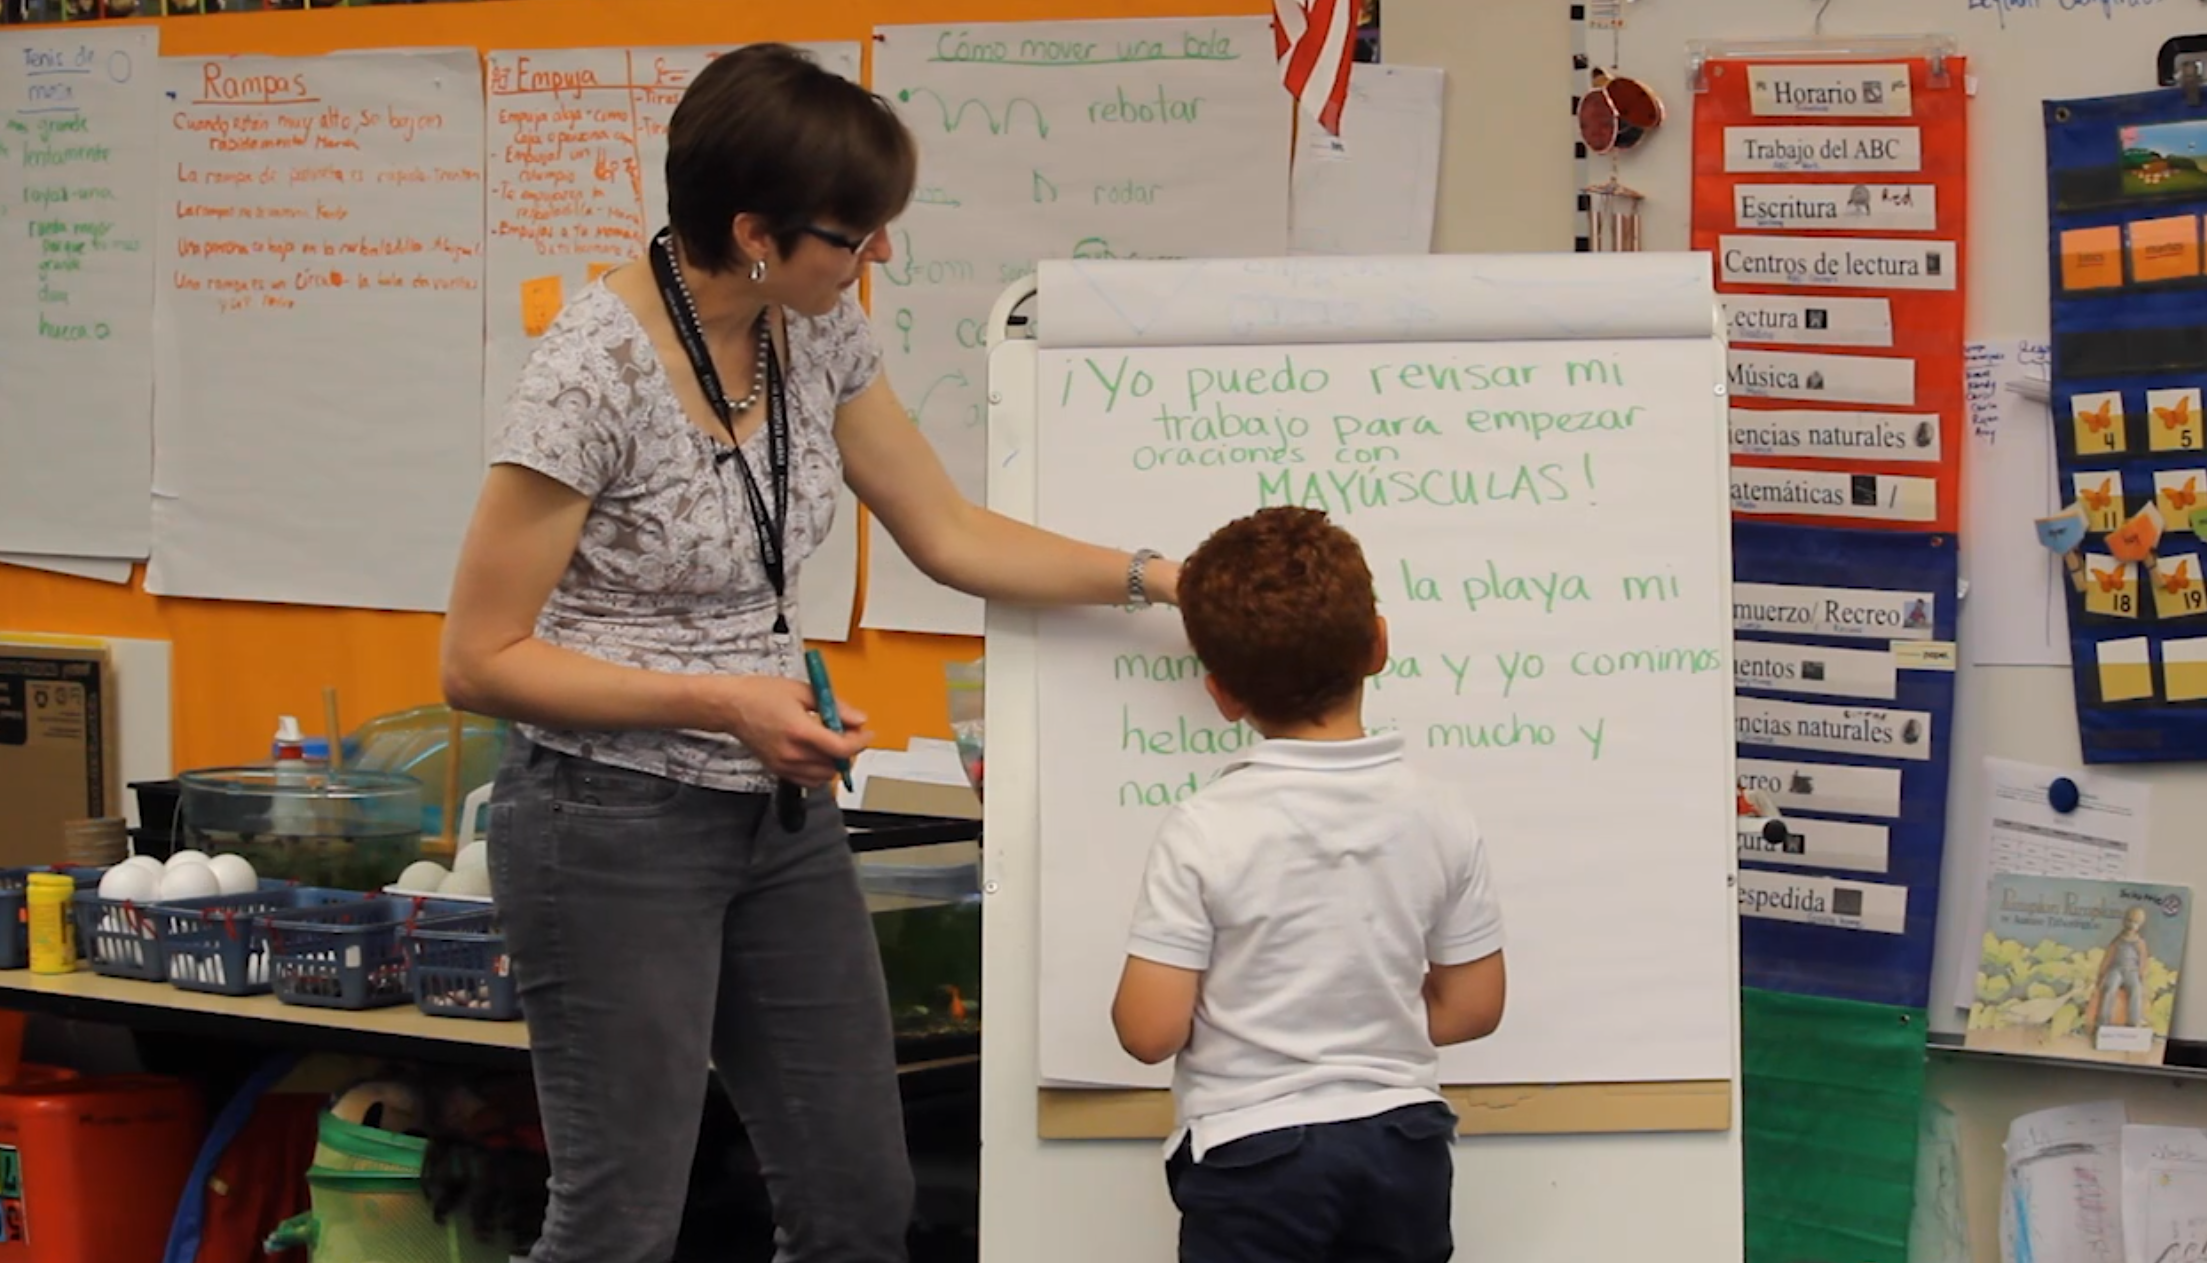 The image shows a teacher pointing to spanish words on a classroom display board while a child watches closely.